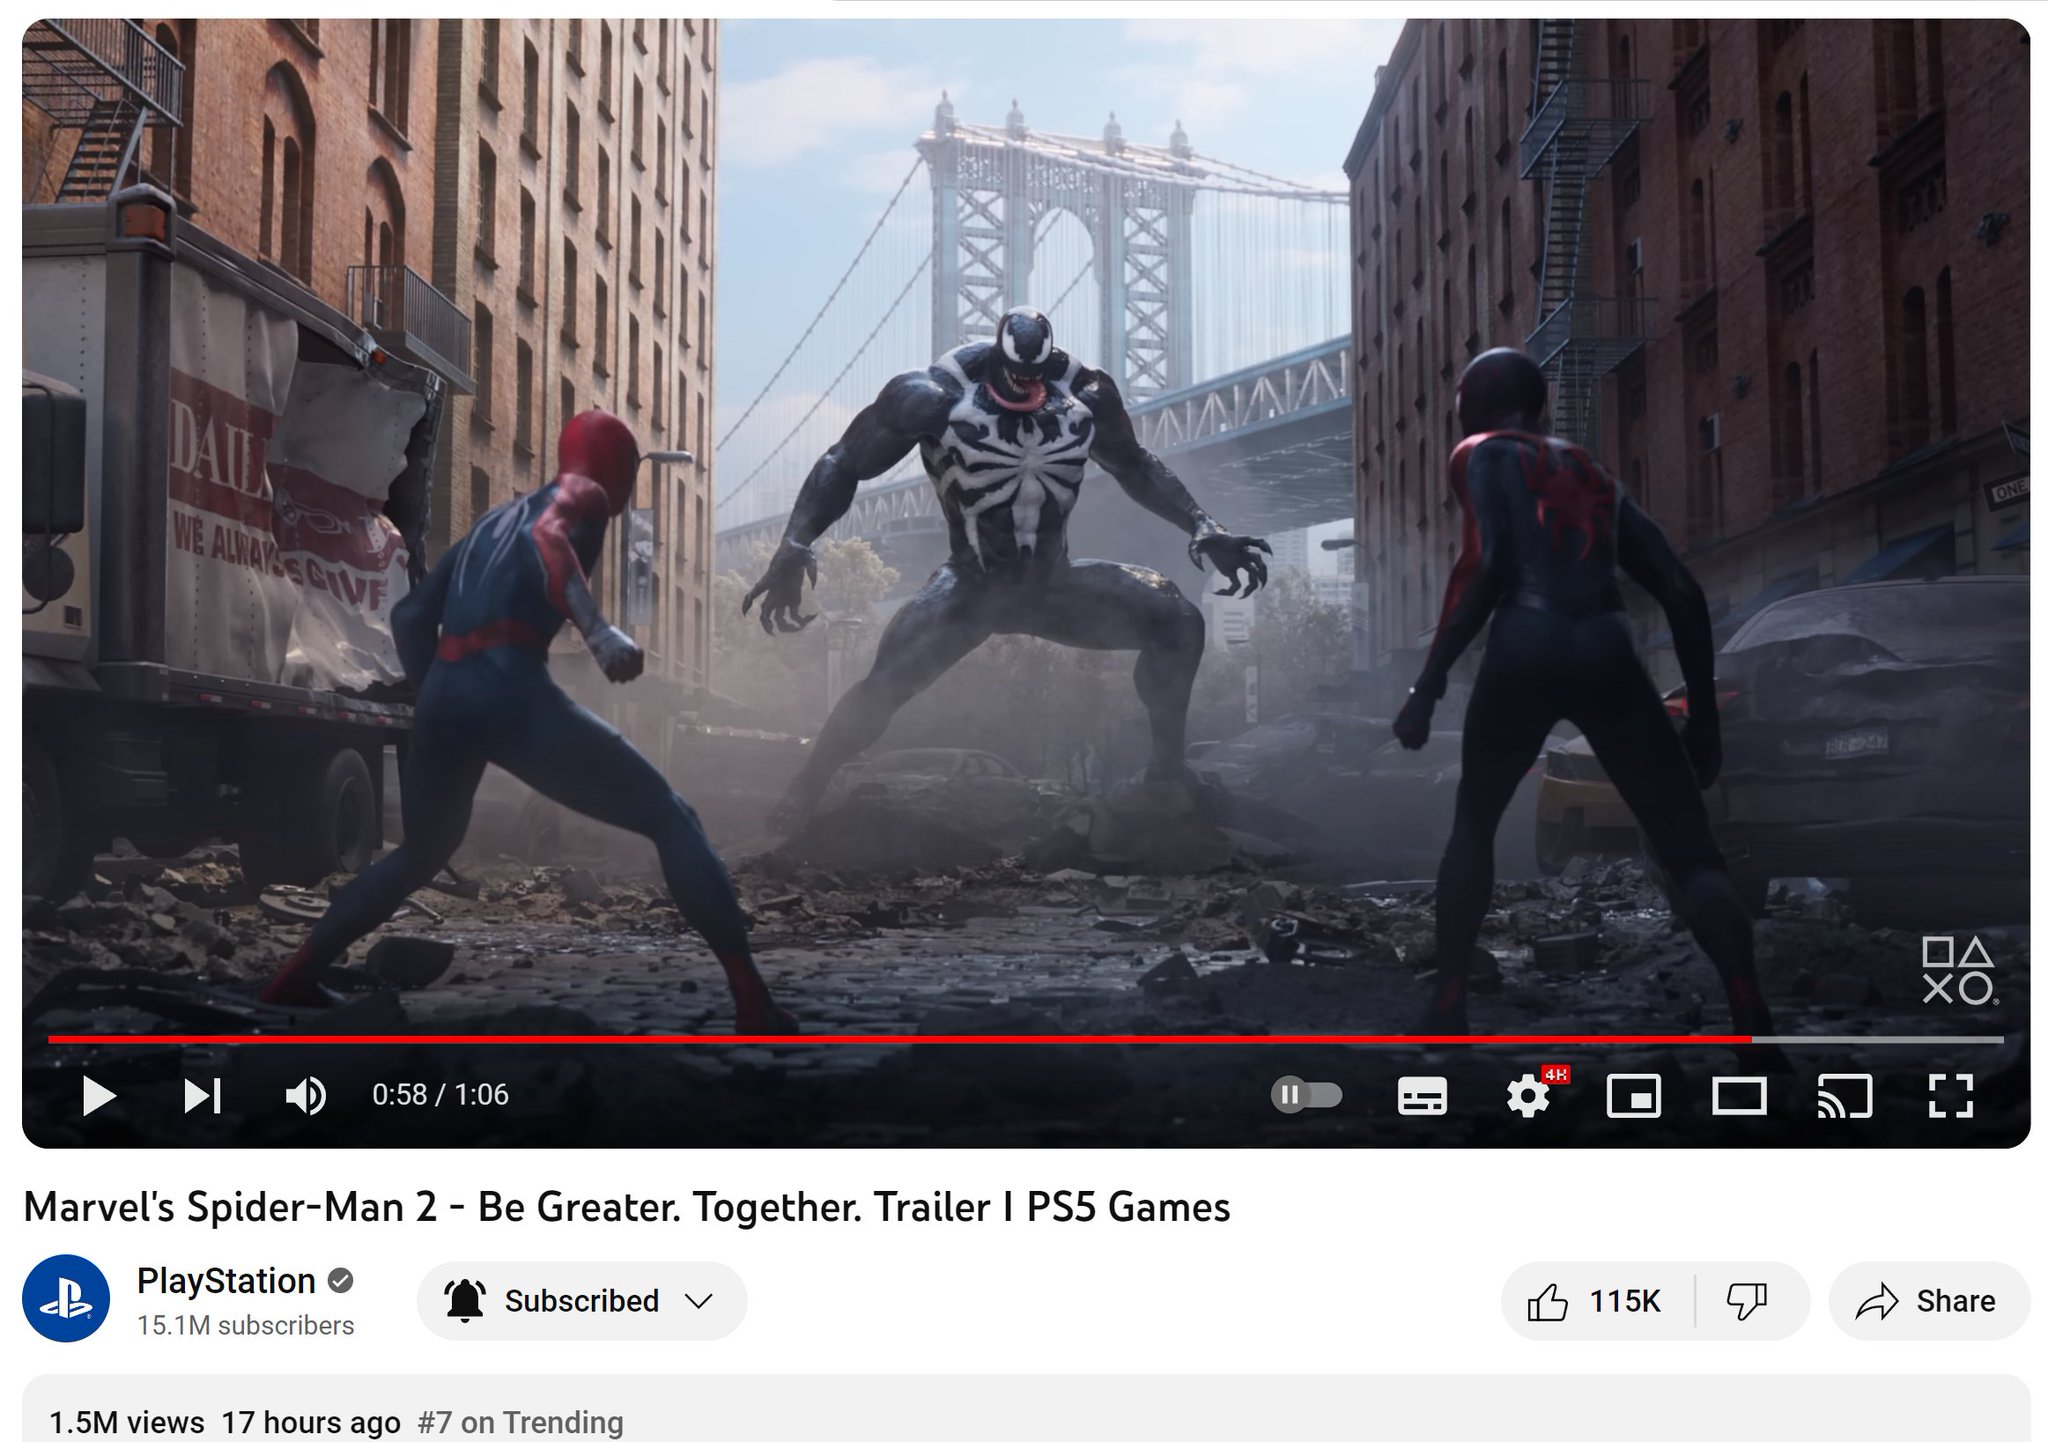 Zuby_Tech on X: Marvel's Spider-Man 2 Be Greater Together Trailer  Surpasses 1.5 Million Views In Under 24 Hours! They Hype Is Real!   #MarvelsSpiderMan2 #SpiderMan2PS5 #SpiderMan2  #BeGreaterTogether #Venom @insomniacgames https